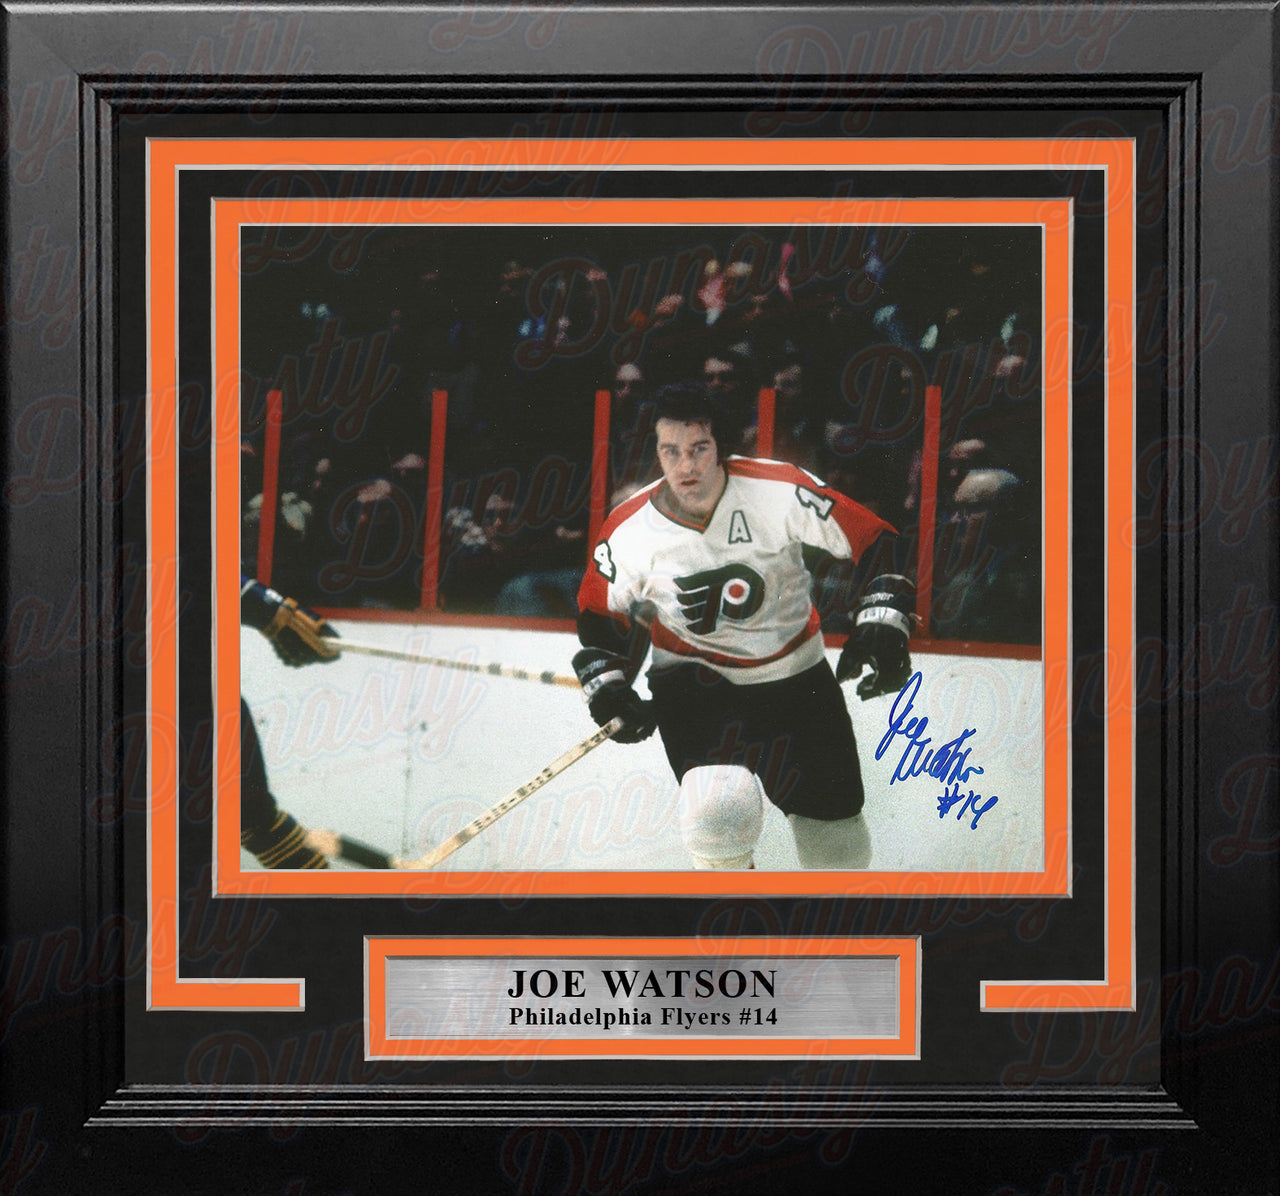 Eric Lindros in Action Philadelphia Flyers 8 x 10 Framed Hockey Photo  with Engraved Autograph - Dynasty Sports & Framing